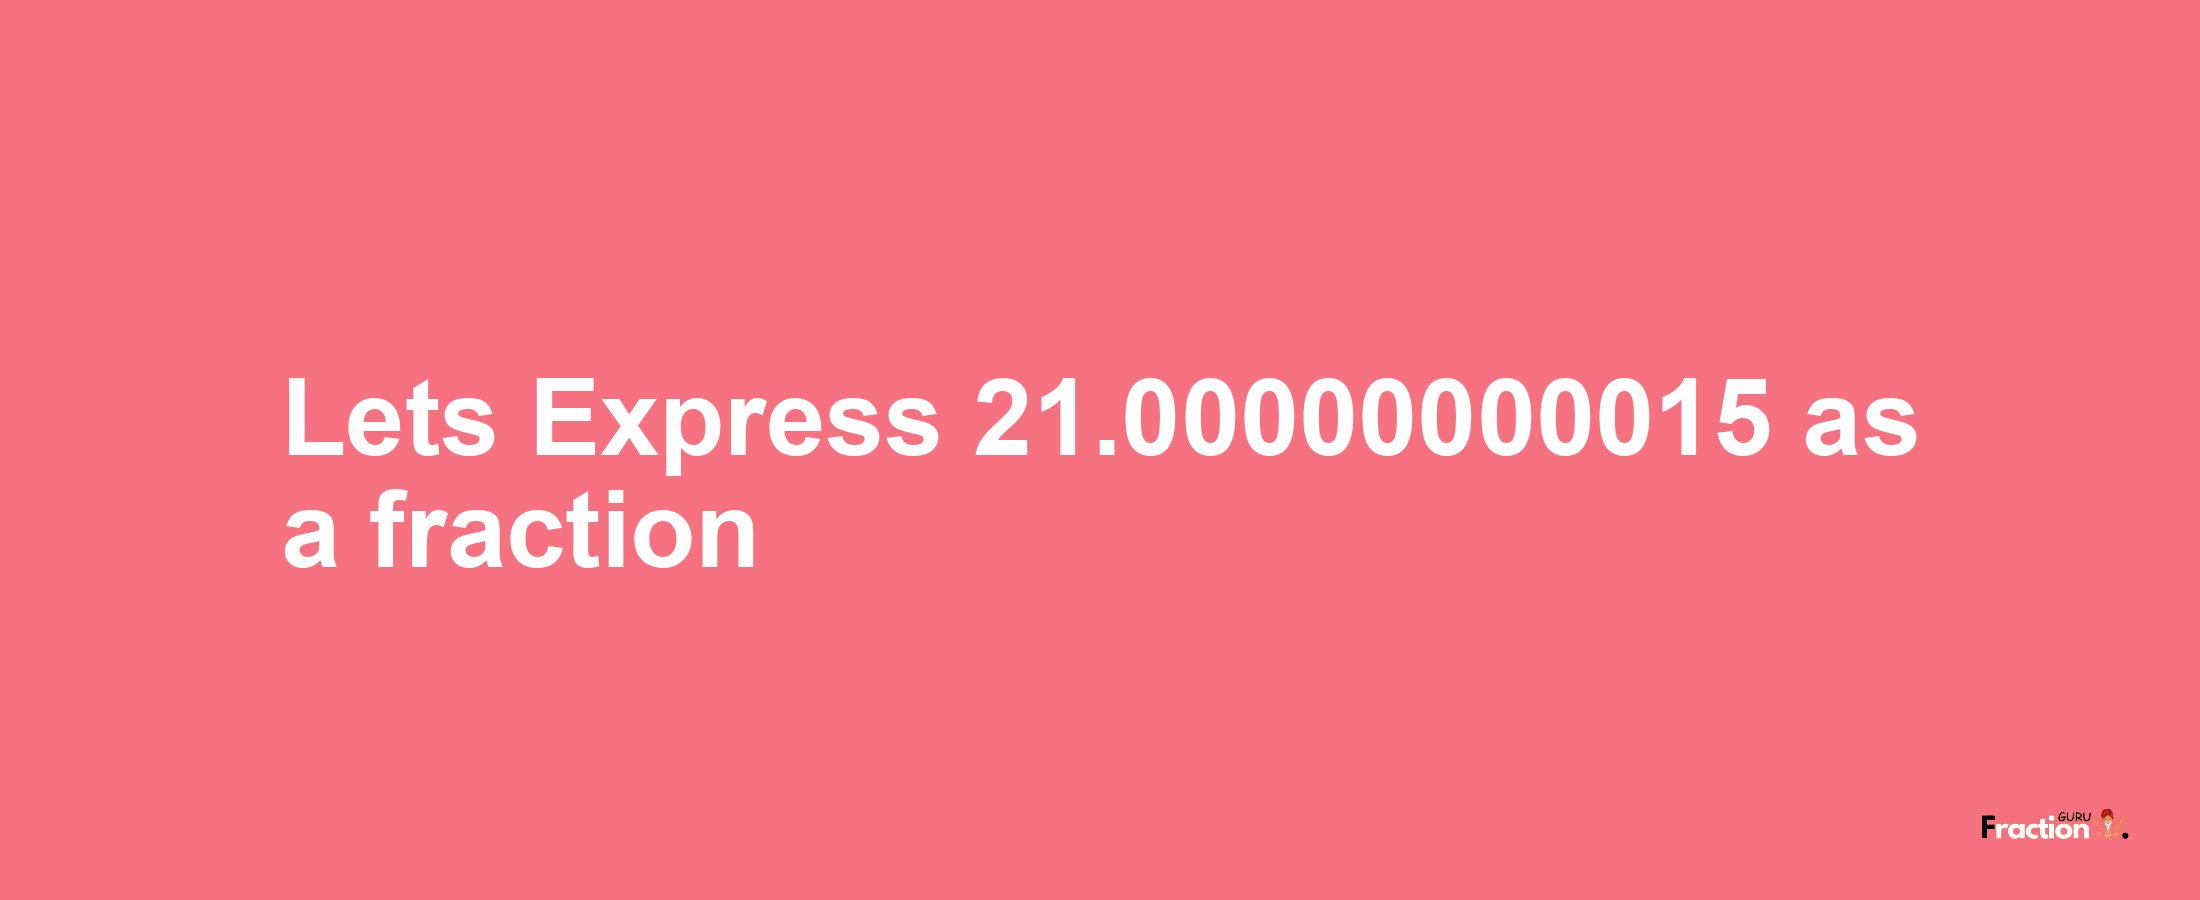 Lets Express 21.00000000015 as afraction